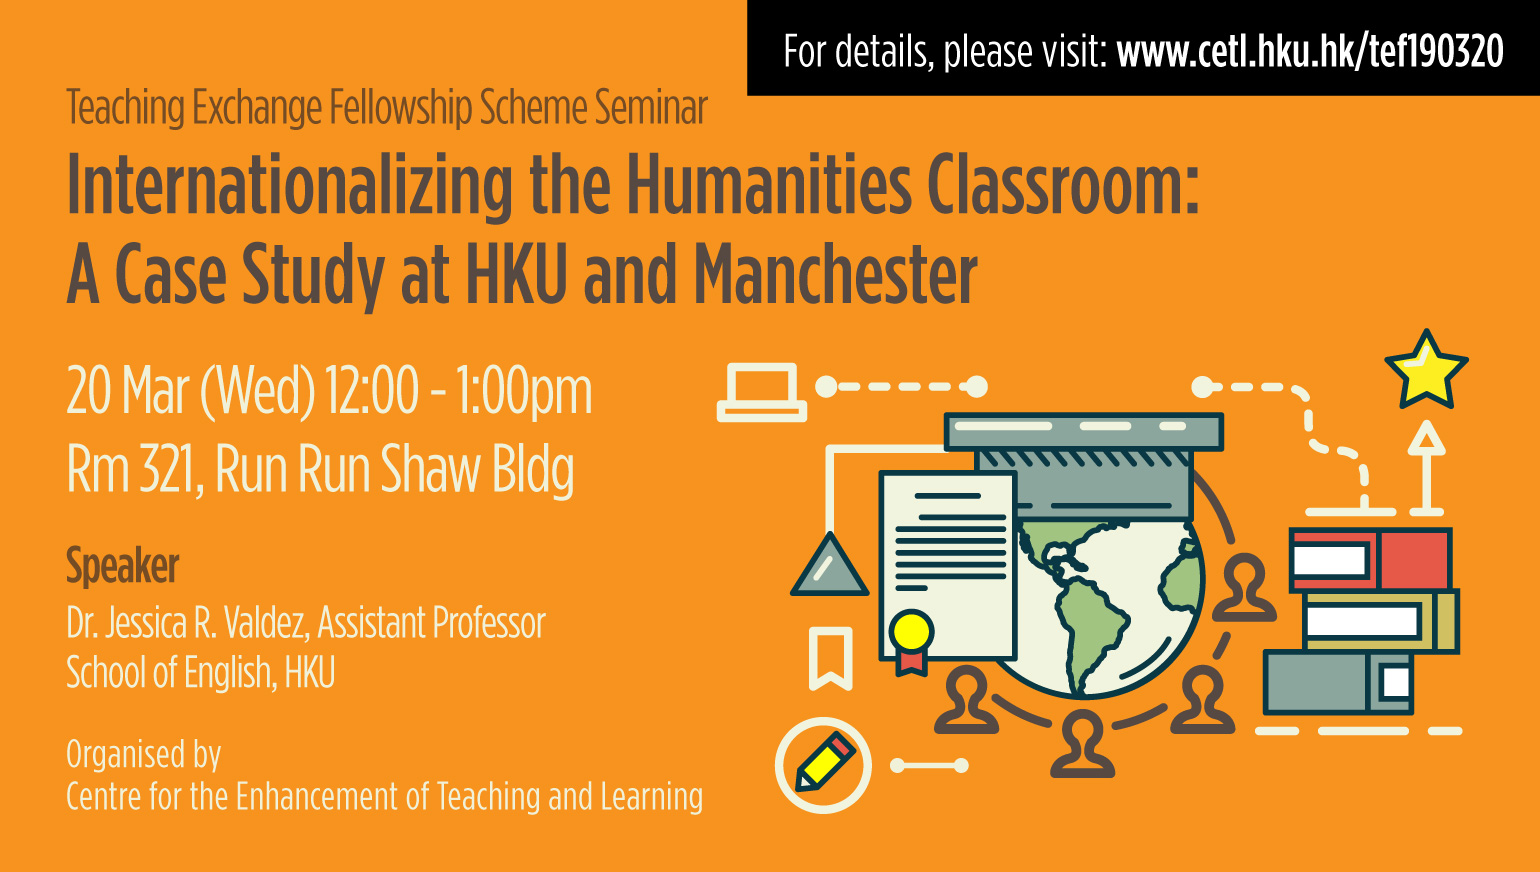 Teaching Exchange Fellowship Scheme Seminar – Internationalizing the Humanities Classroom: A Case Study at HKU and Manchester